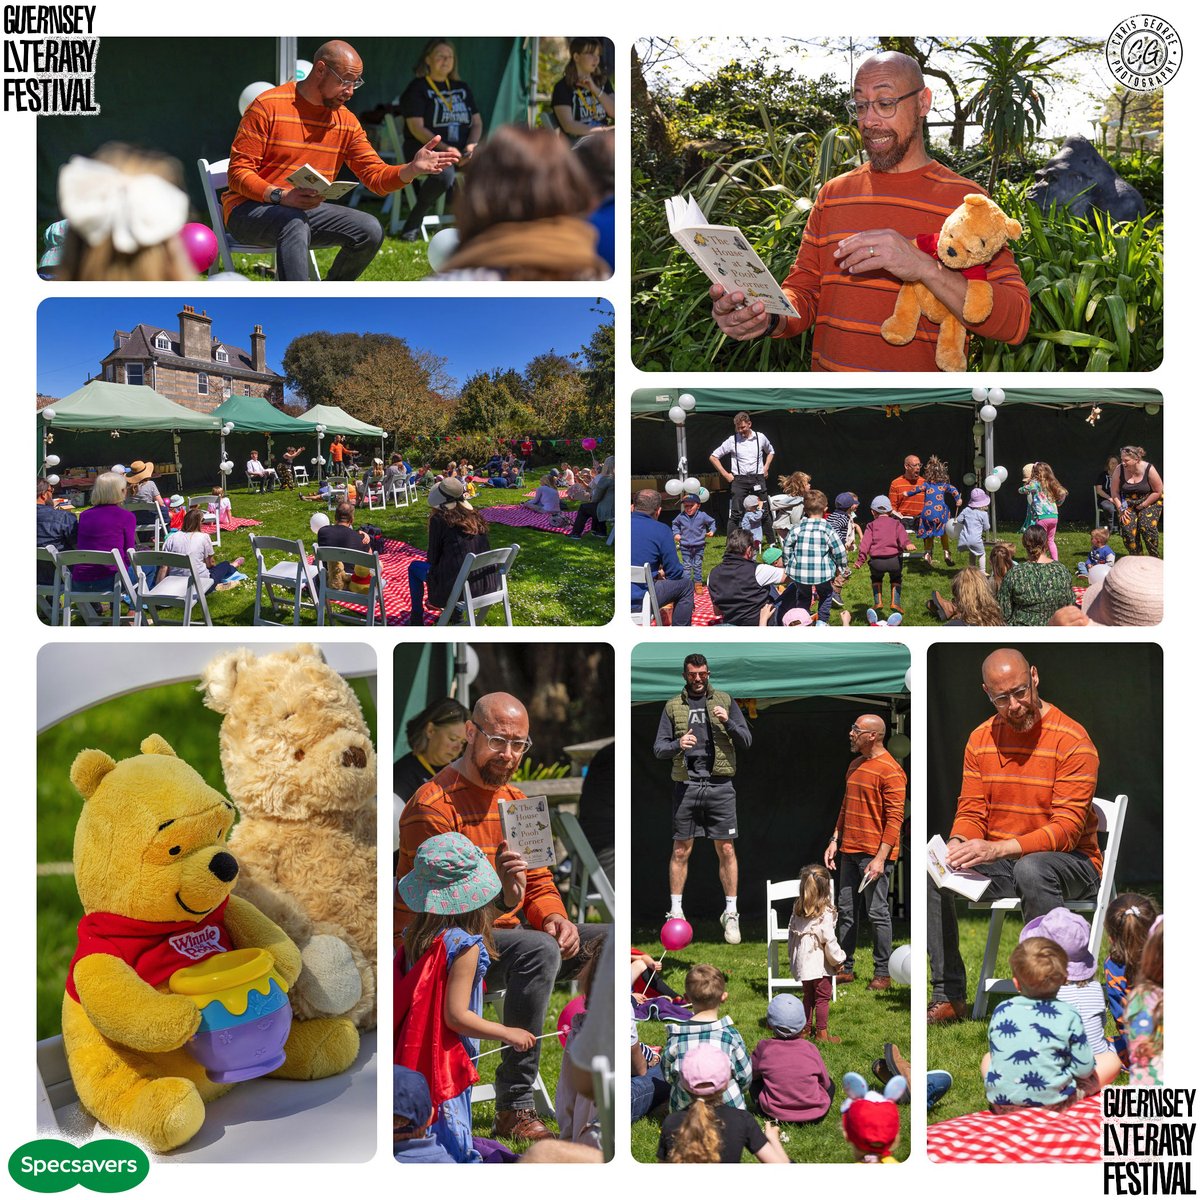 @GuernseyLitFest. This afternoon, children took part in an interactive, immersive Winnie the Pooh tea party experience, led by professional actor Andrew Hislop. The storytelling event, which took place in the gardens at Sausmarez Manor, was kindly sponsored by @Specsavers